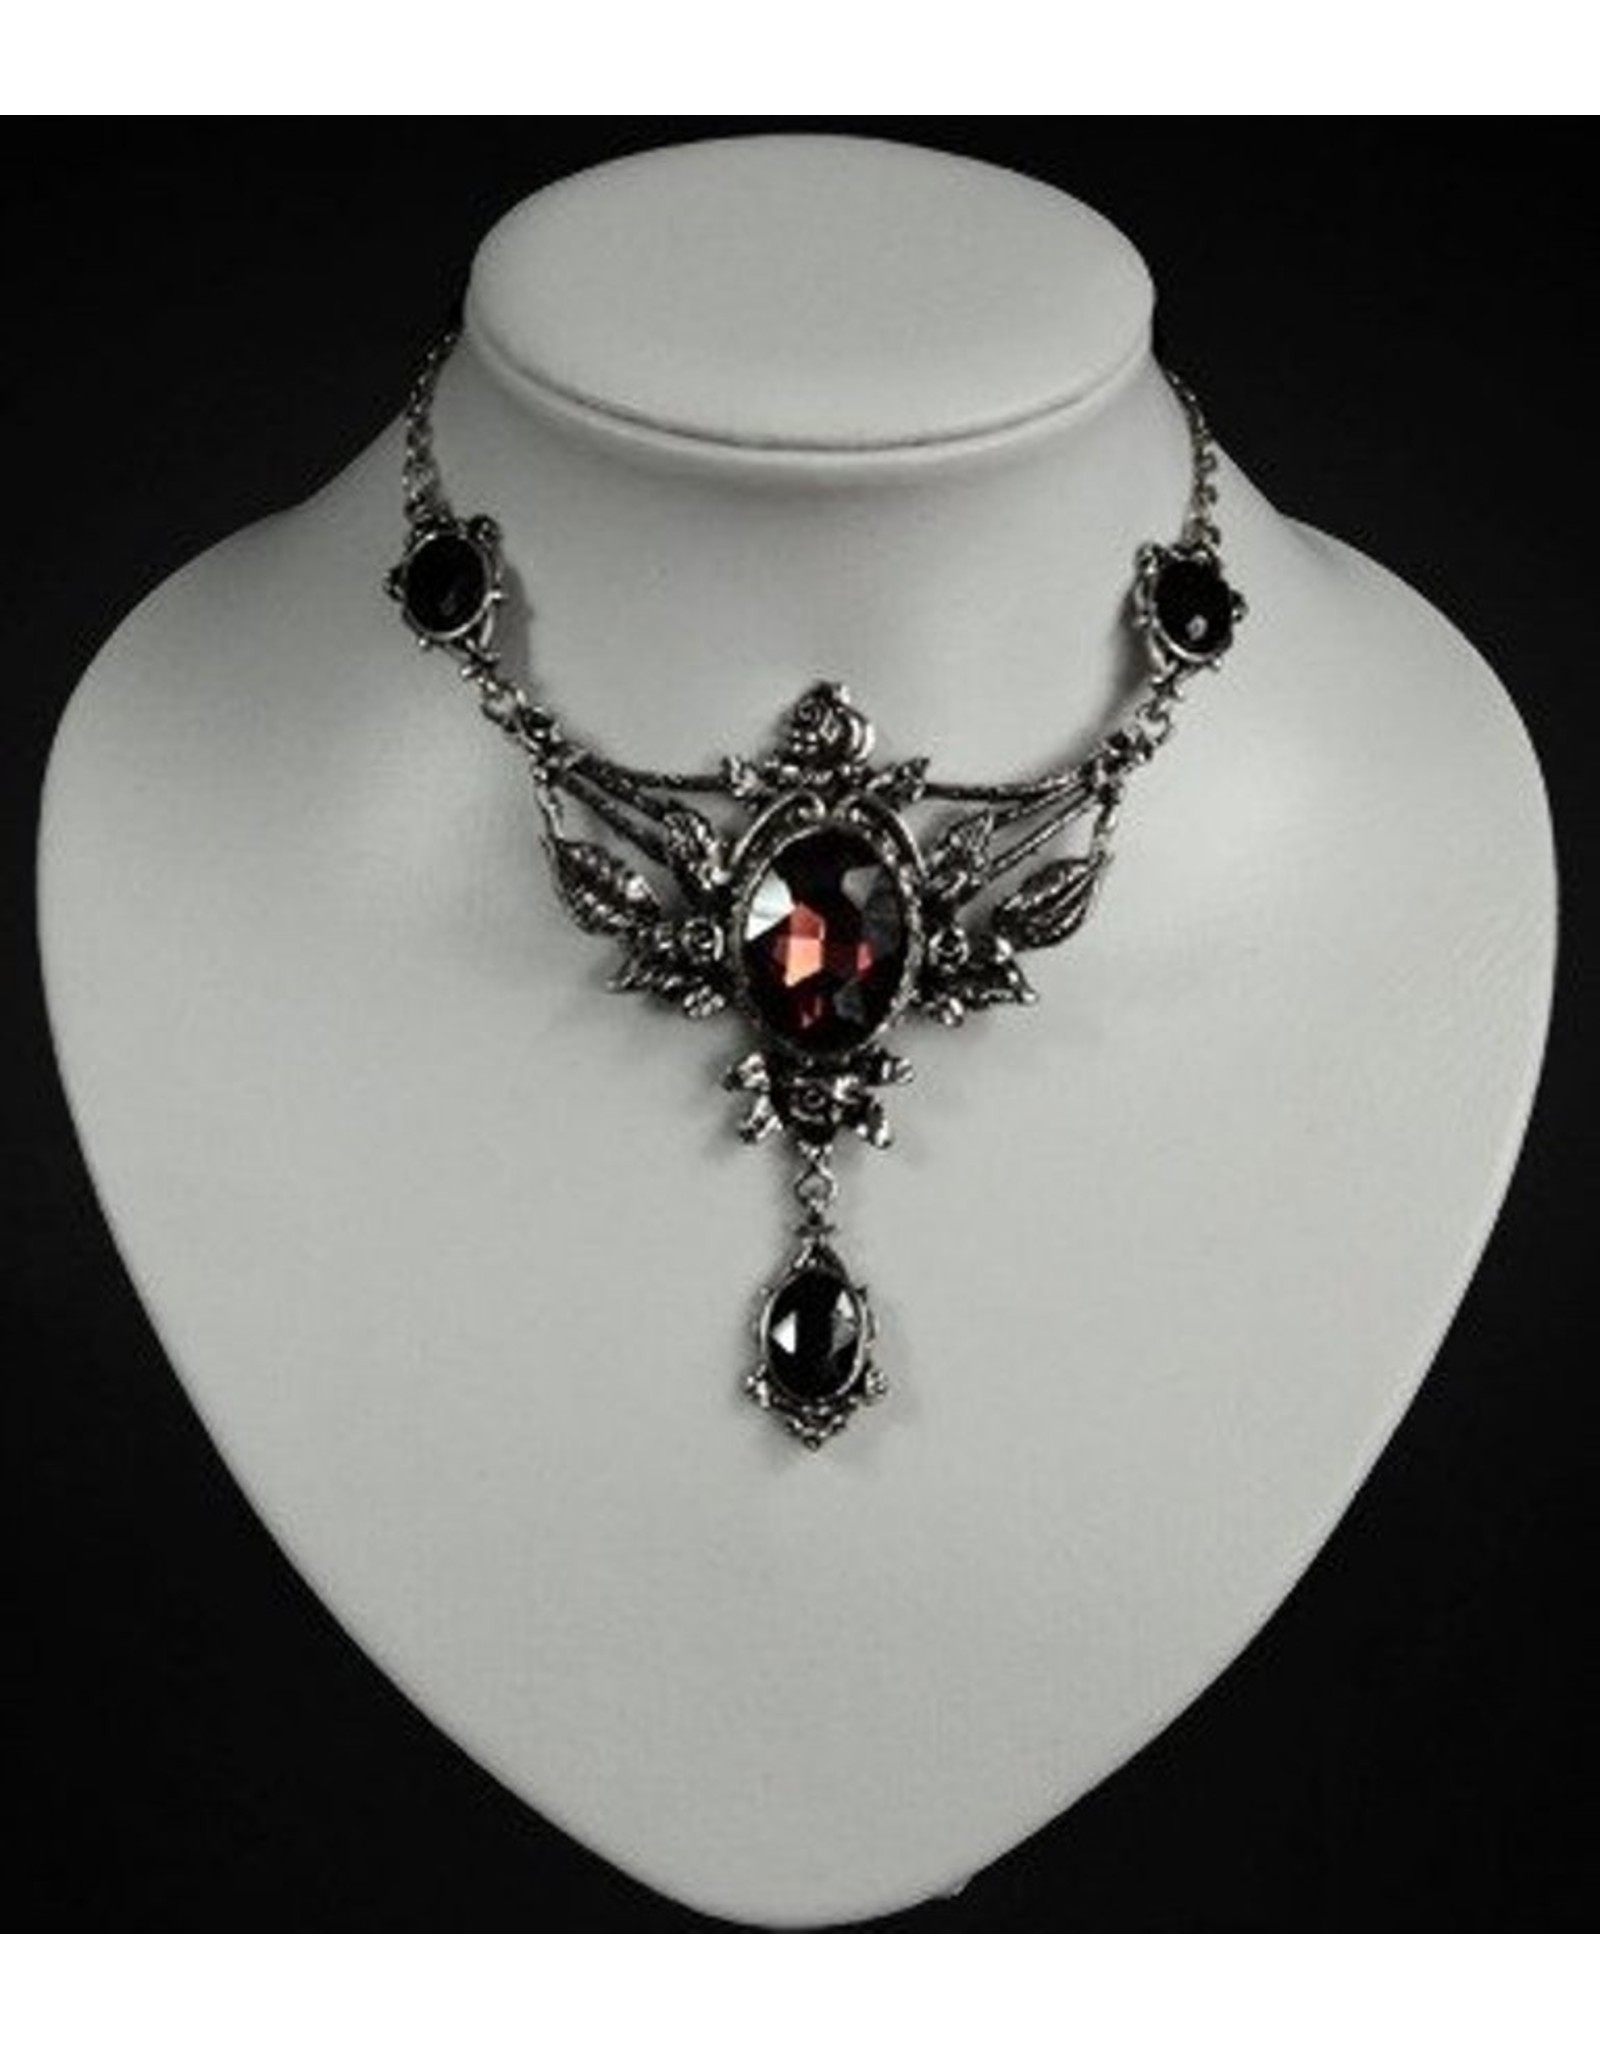 Restyle Gothic and Steampunk accessories - Wild Roses Necklace with Pendant Restyle